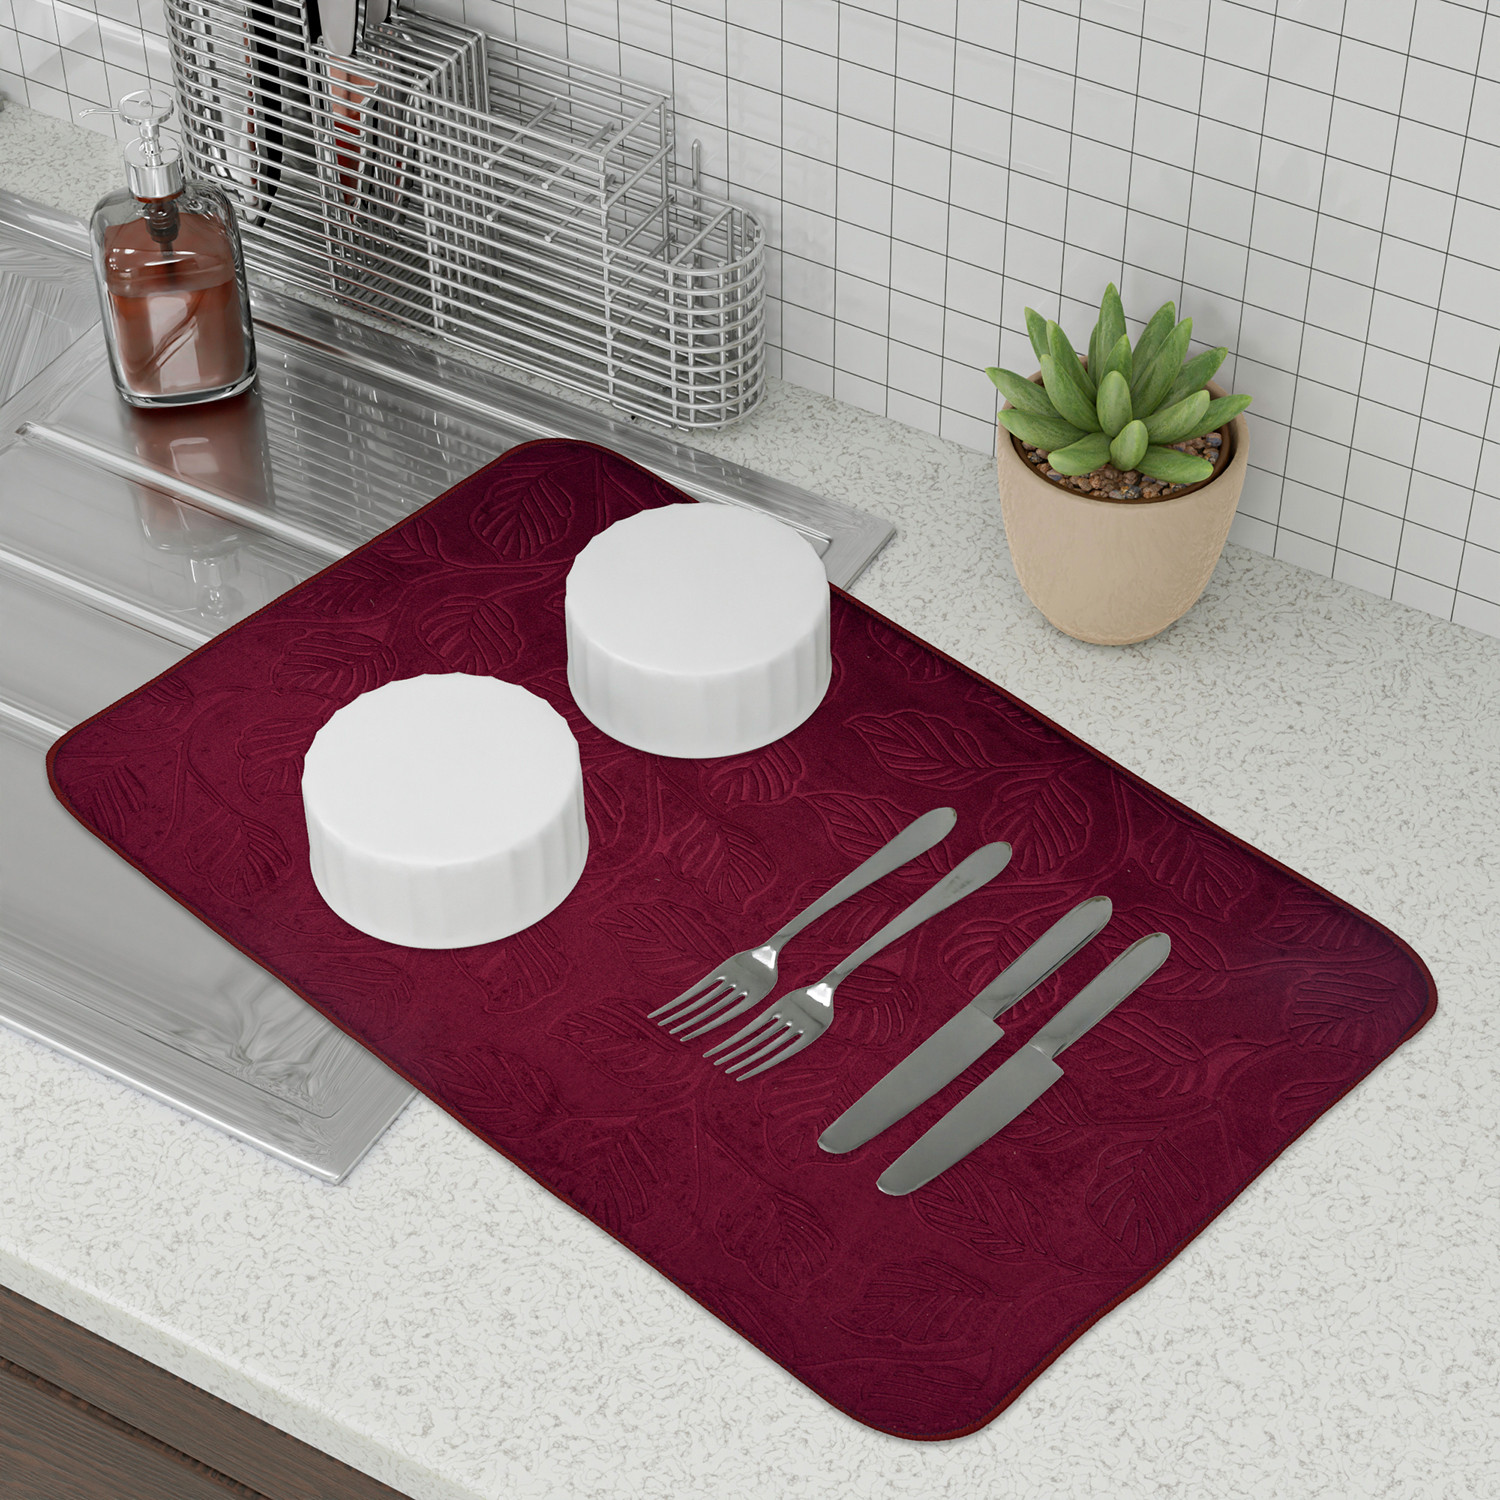 Kuber Industries Dish Dry Mat | Microfiber Self Drying Mat | Kitchen Drying Mat | Water Absorbent Kitchen Mat | Embossed Dish Dry Mat | 50x70 | Pack of 2 | Maroon & Blue